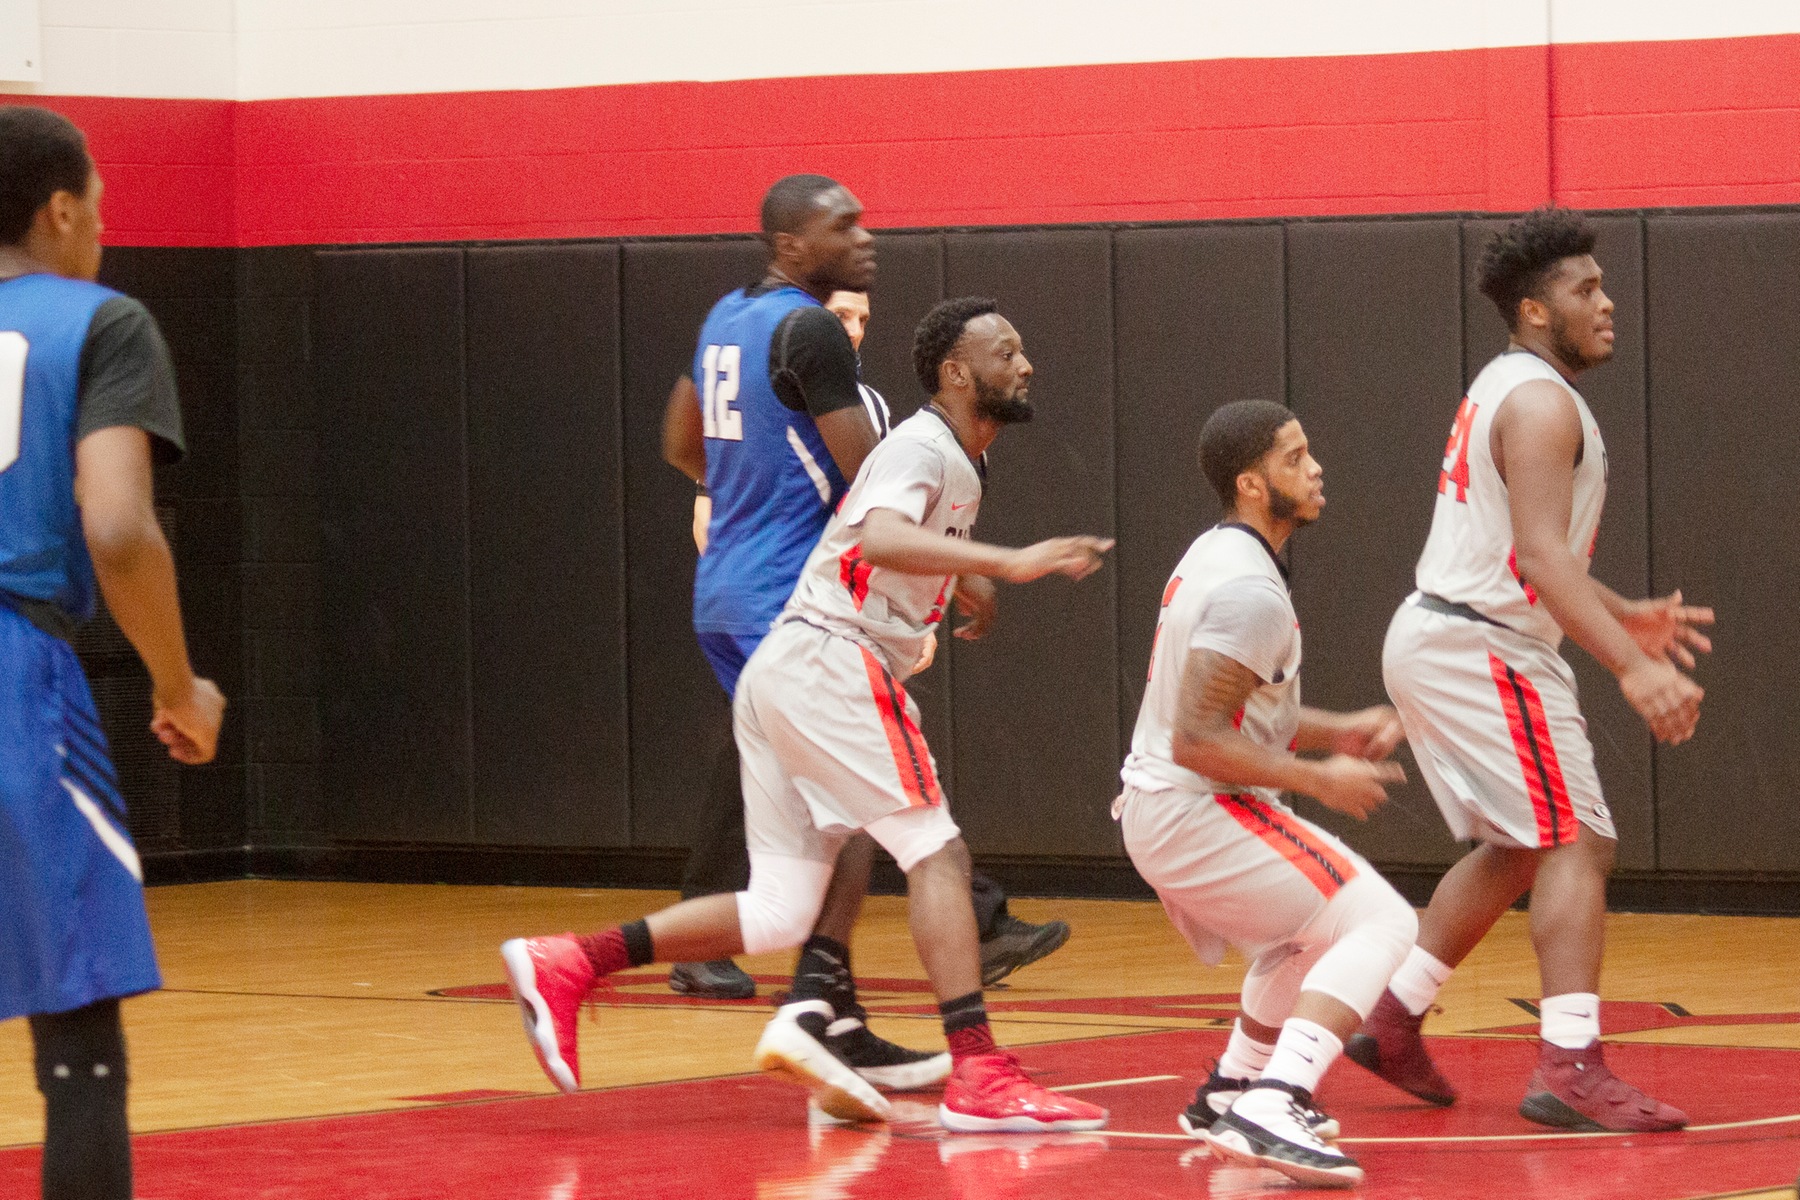 The Spartans defeated SUNY Broome 91-75 in their first road contest of 2019. Photo courtesy of The Cayuga Collegian.